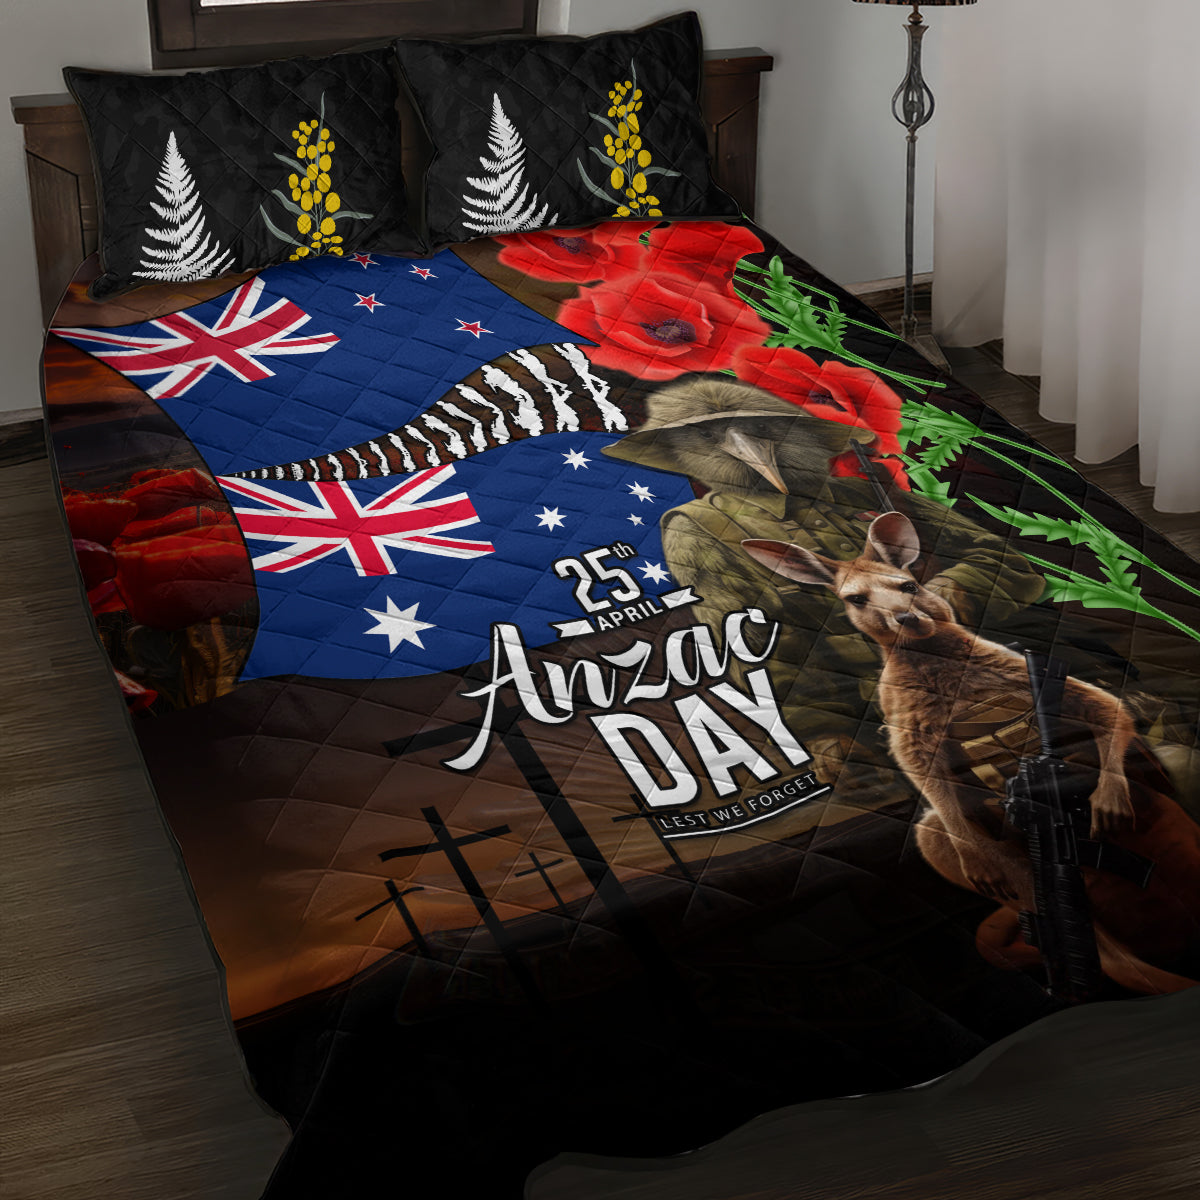 New Zealand and Australia ANZAC Day Quilt Bed Set National Flag mix Kiwi Bird and Kangaroo Soldier Style